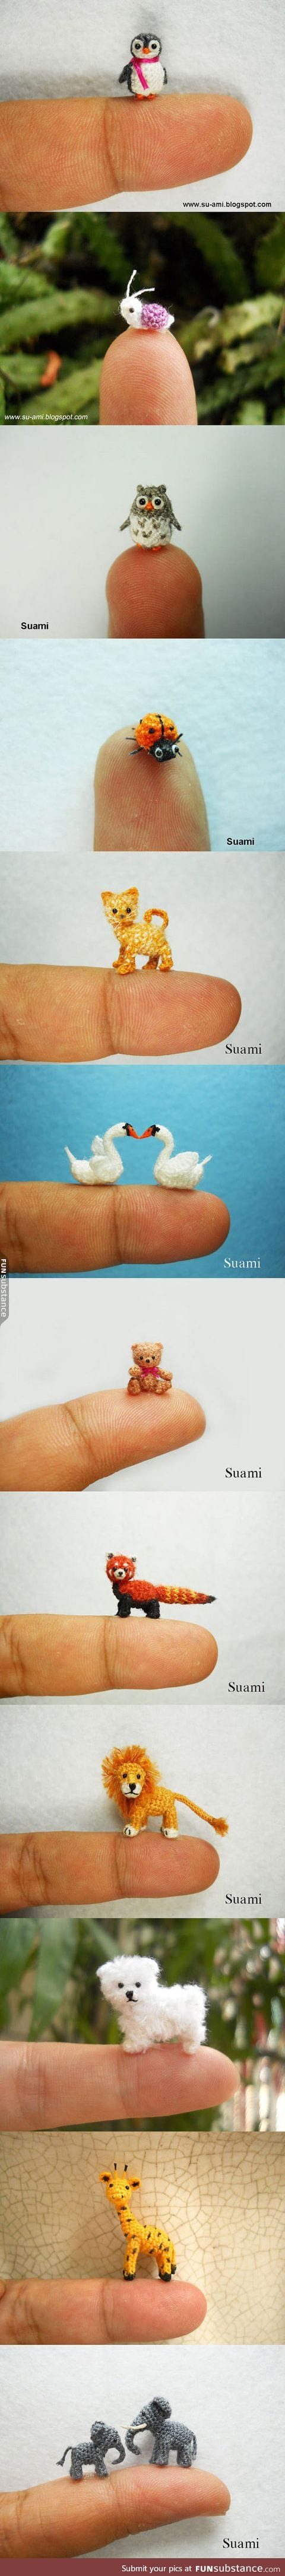 The tiniest animals by suami